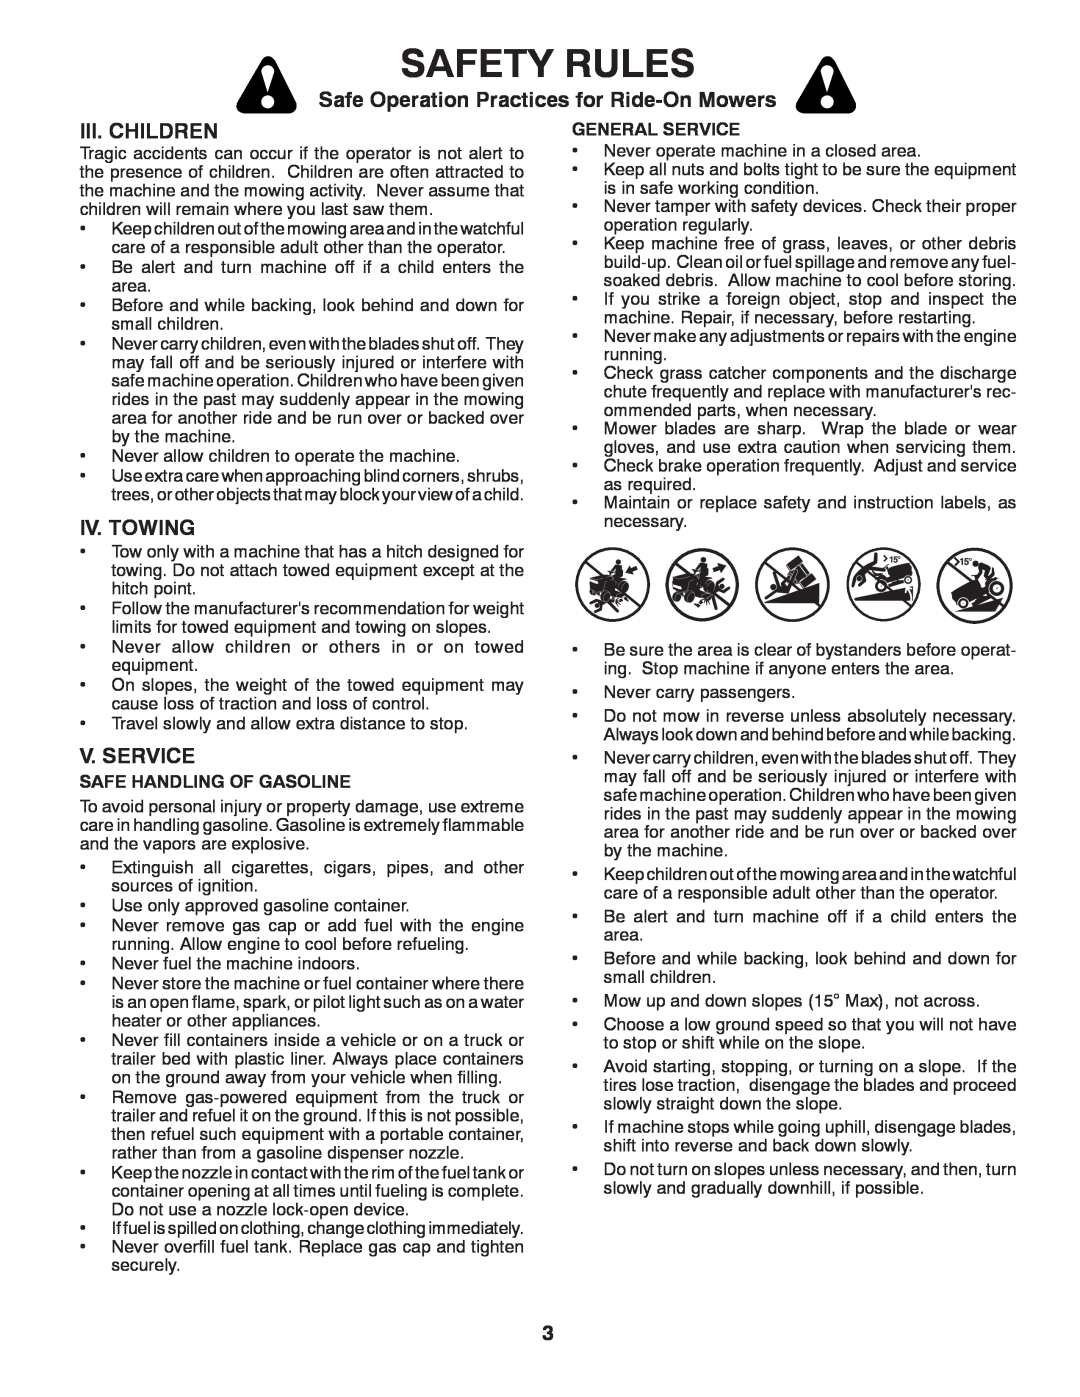 Poulan PP17538HP, 420408 Safety Rules, Safe Operation Practices for Ride-On Mowers, Iii. Children, Iv. Towing, V. Service 